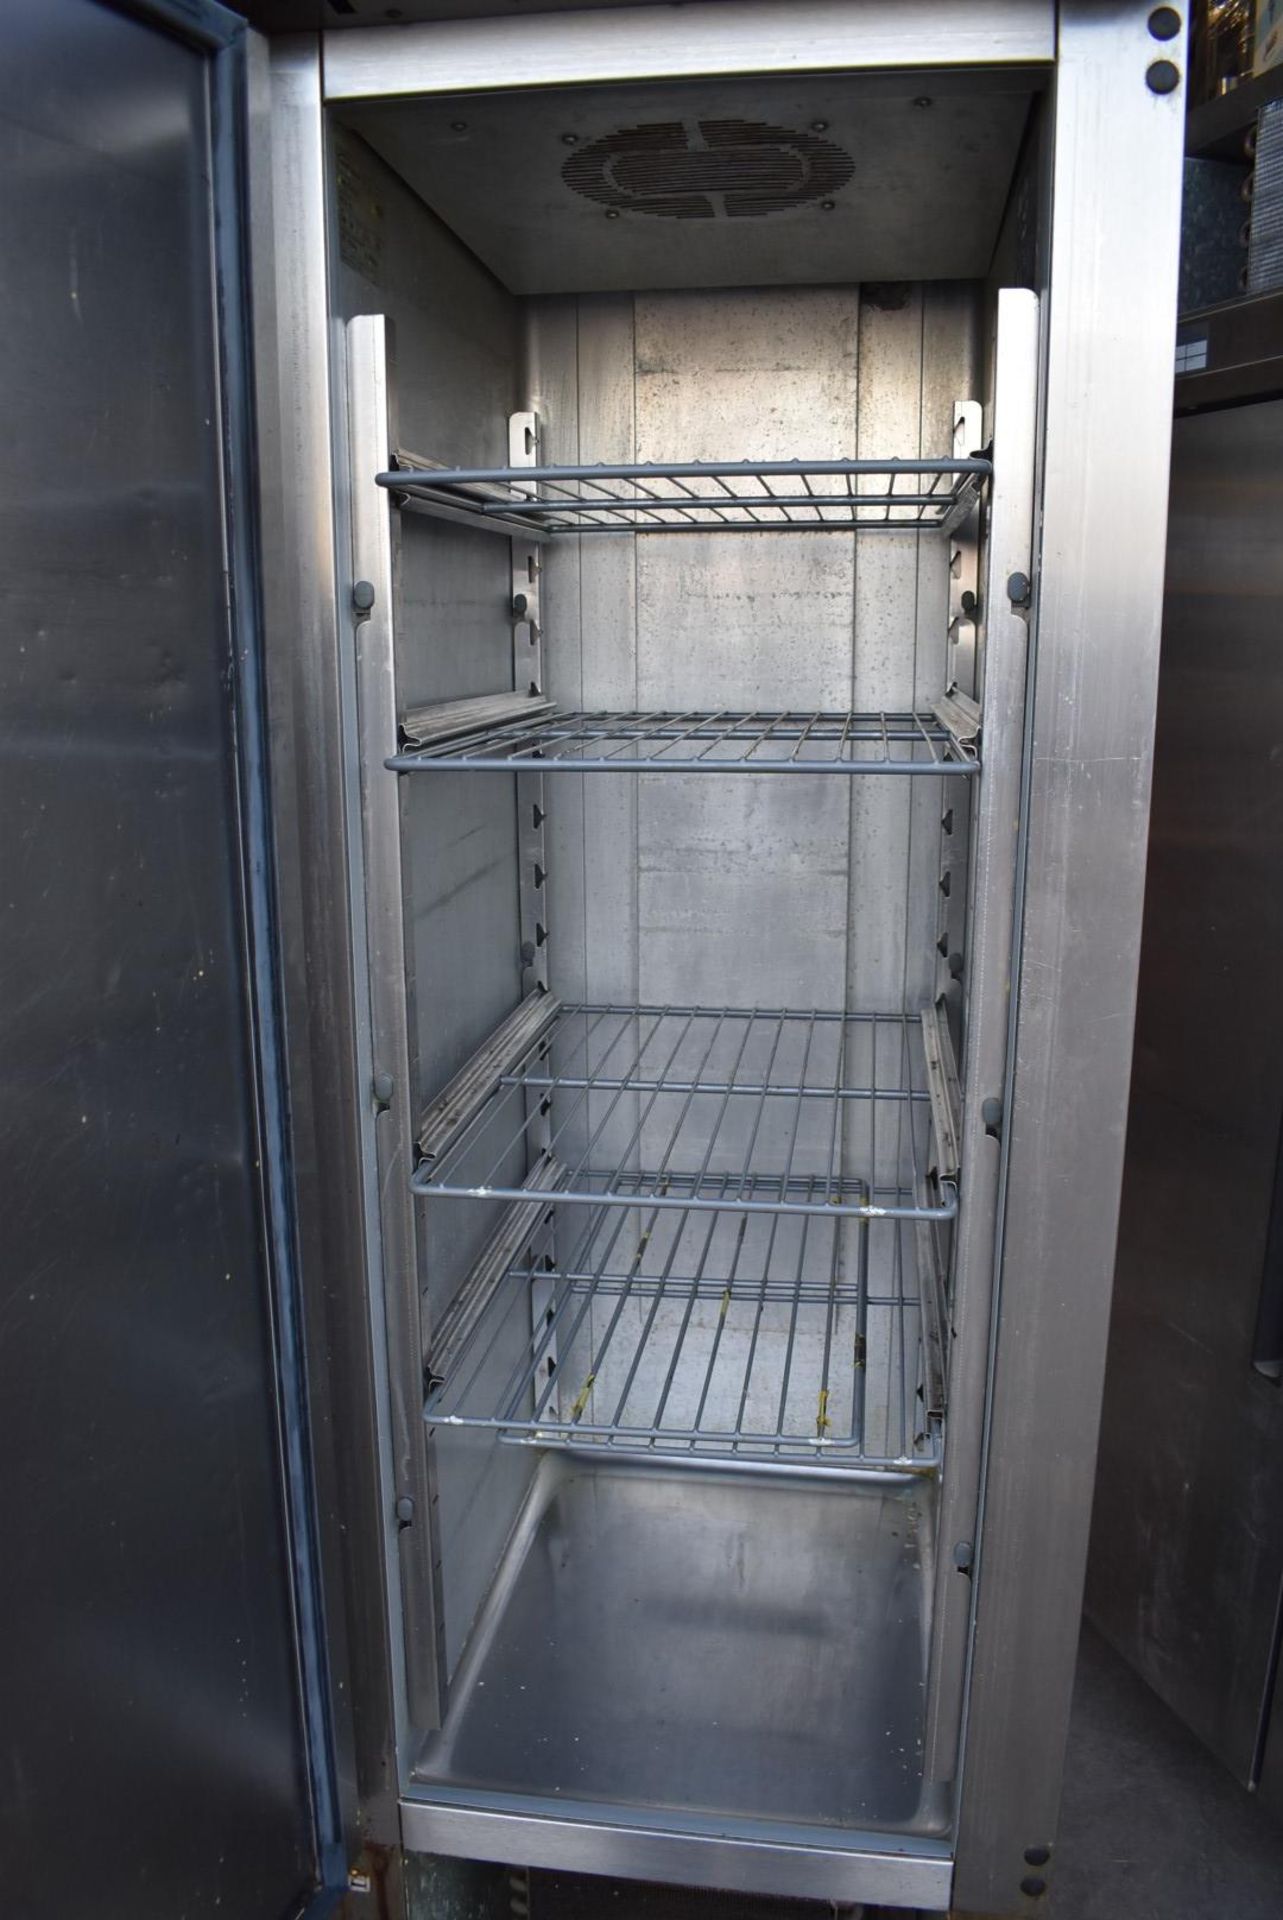 1 x Williams HZ12 Upright Single Door Refrigerator - Recently Removed From a Working Environment - - Image 4 of 8